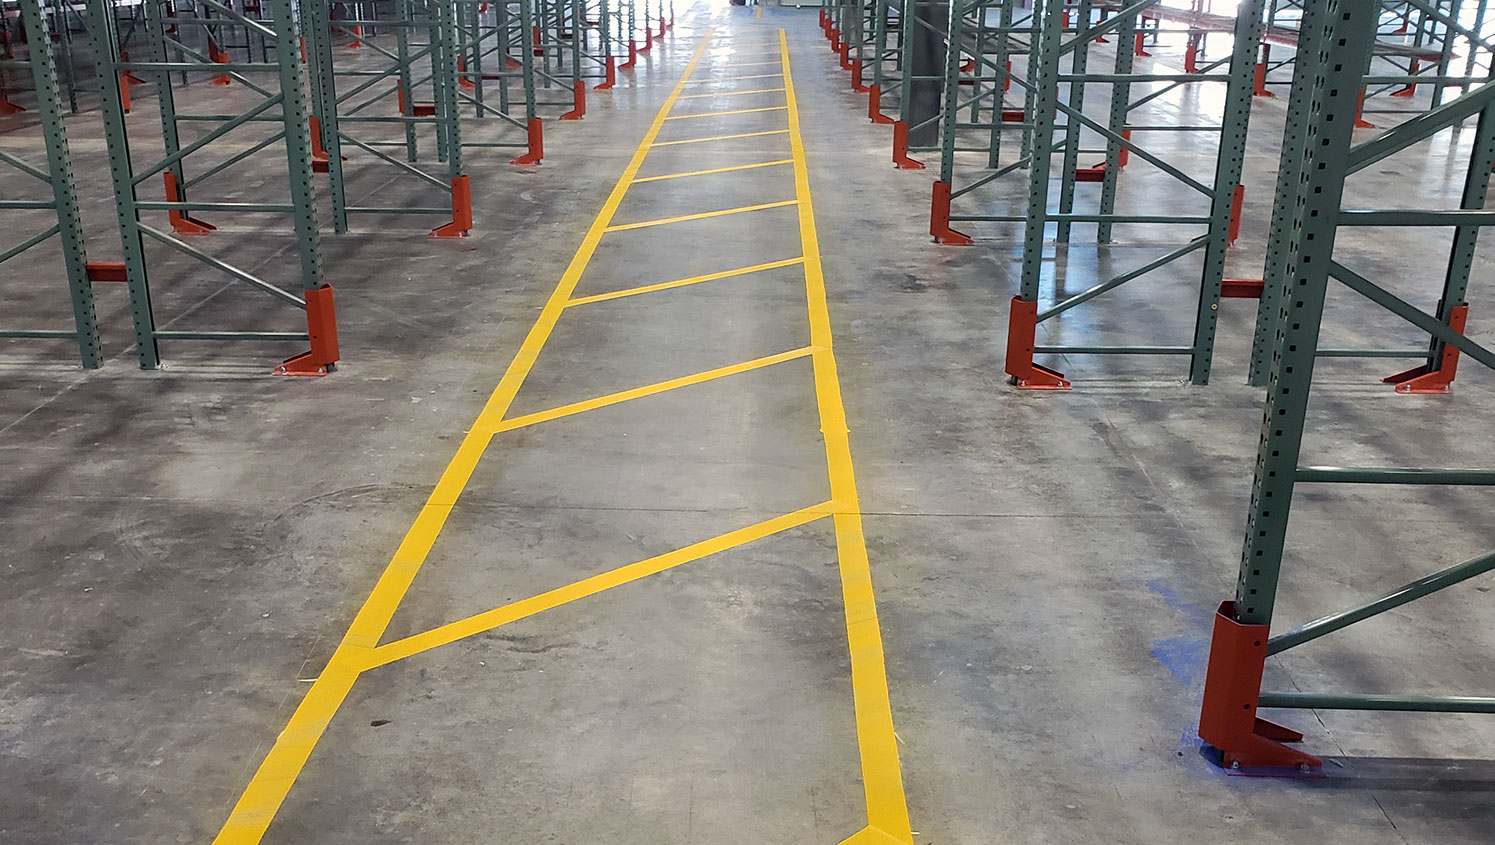 yellow safety lane markings in aisle of new warehouse